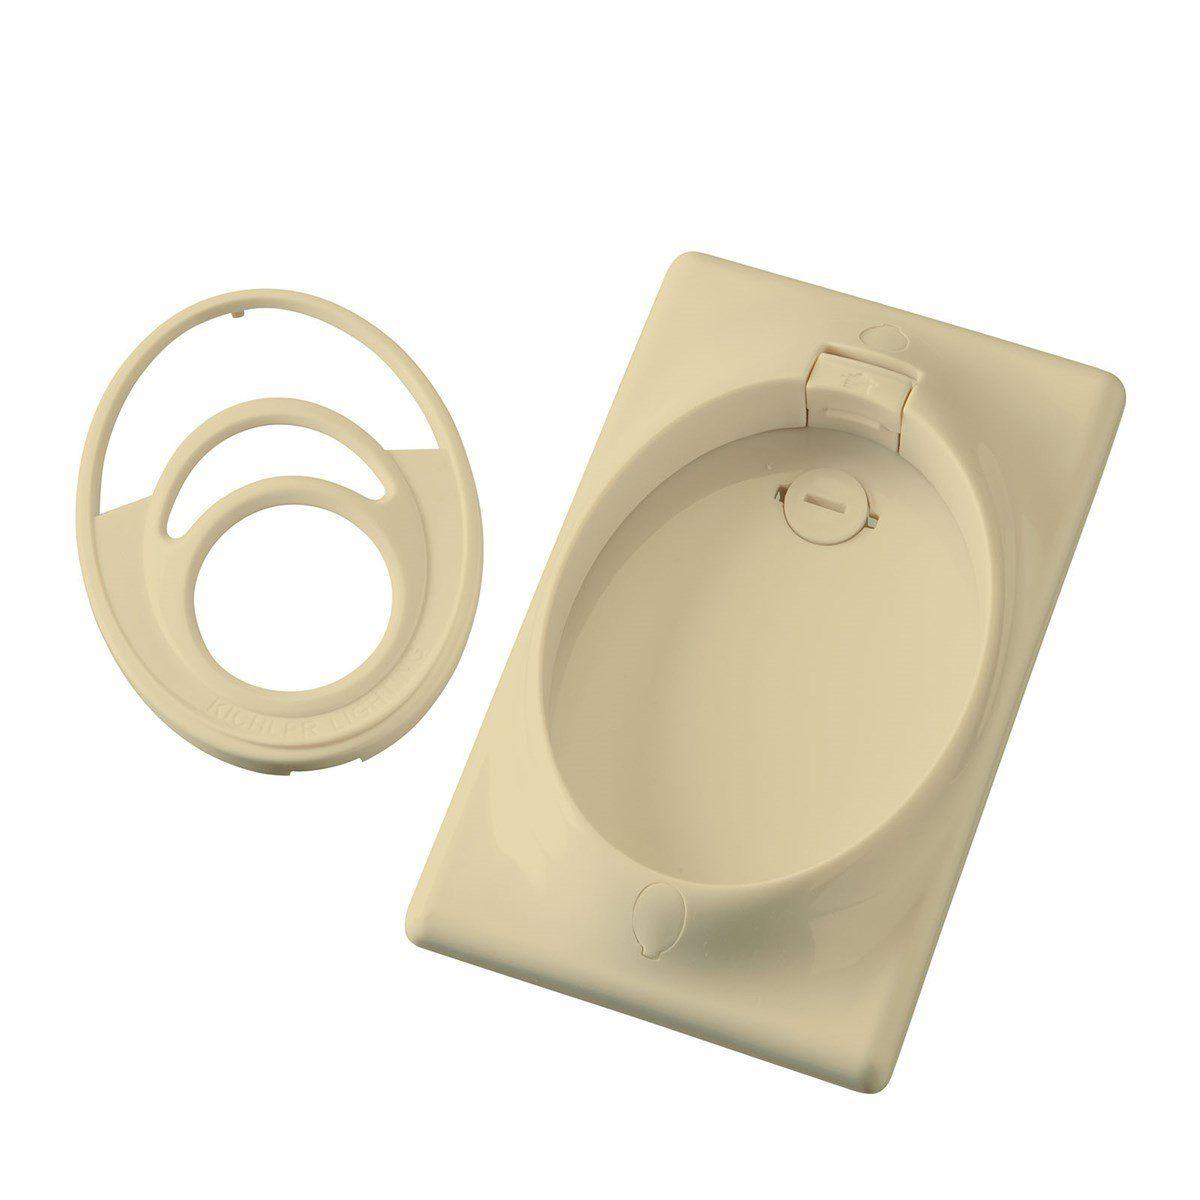 CoolTouch Single Gang Wall Plate, Ivory Finish